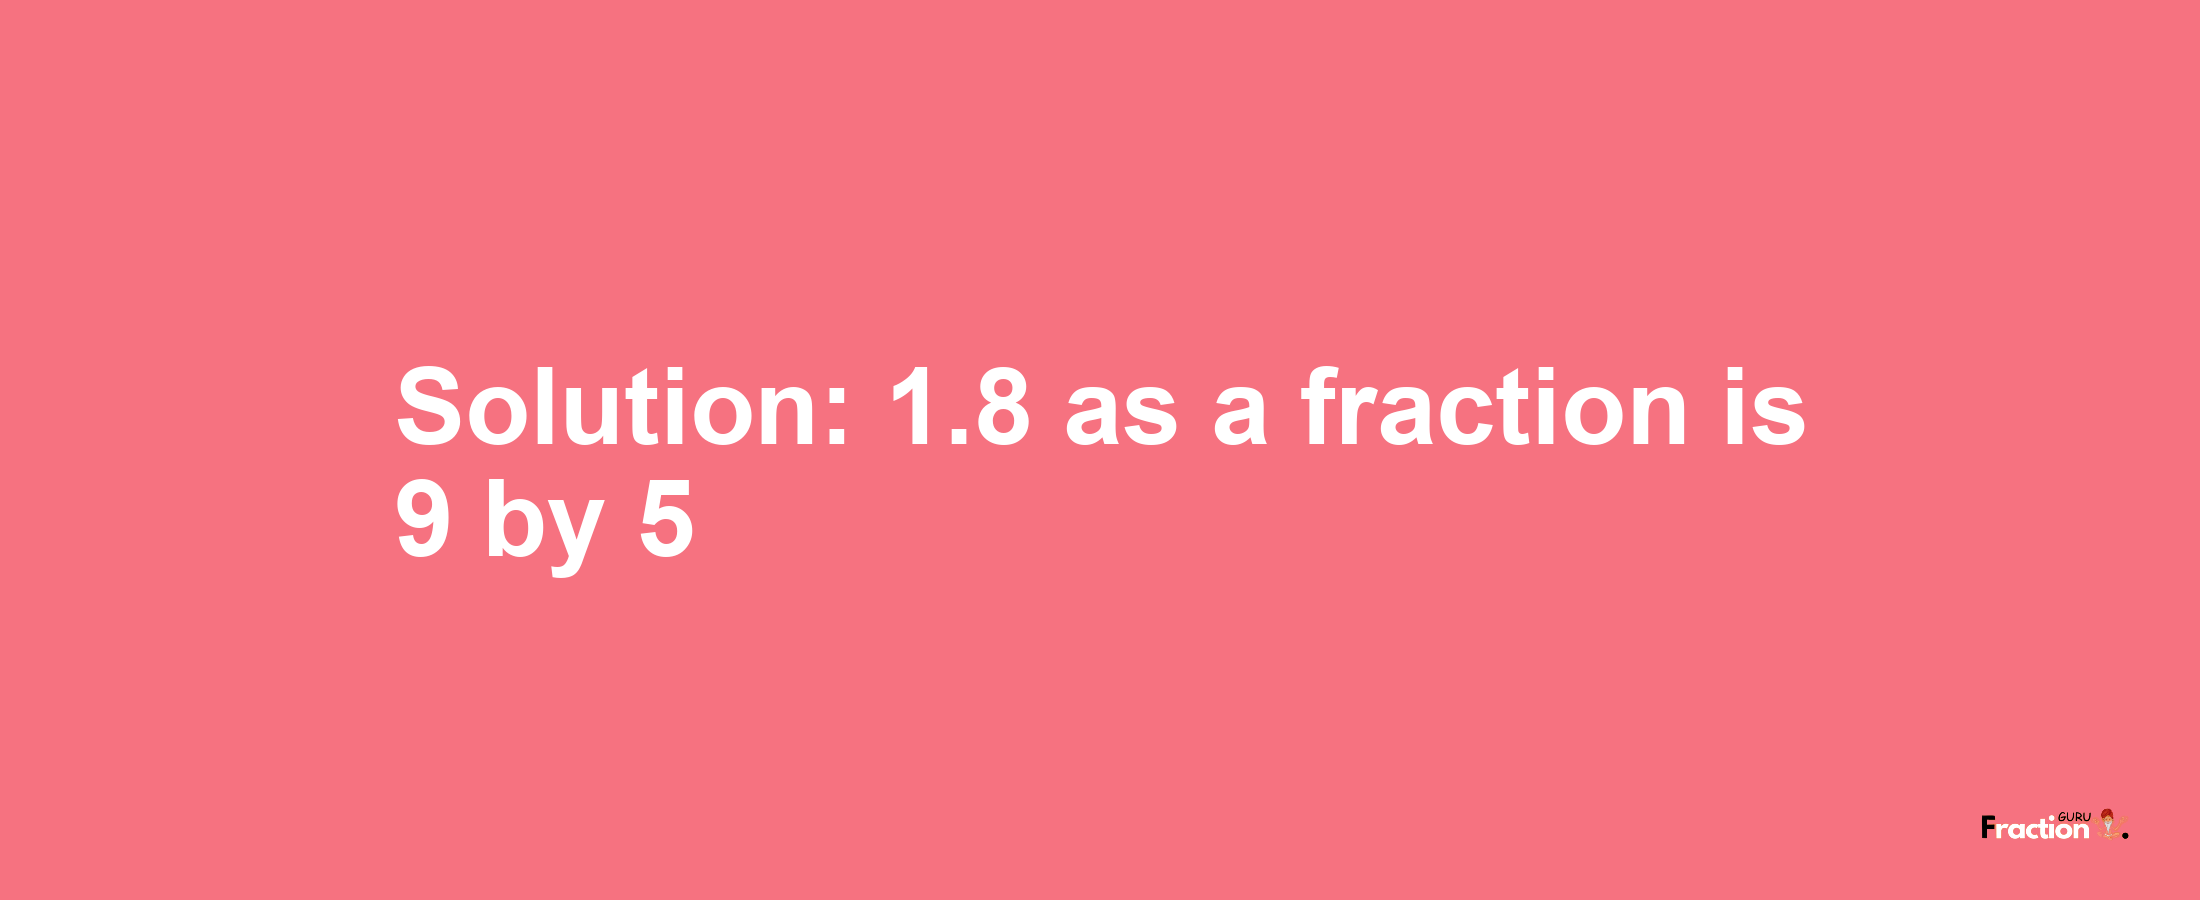 Solution:1.8 as a fraction is 9/5